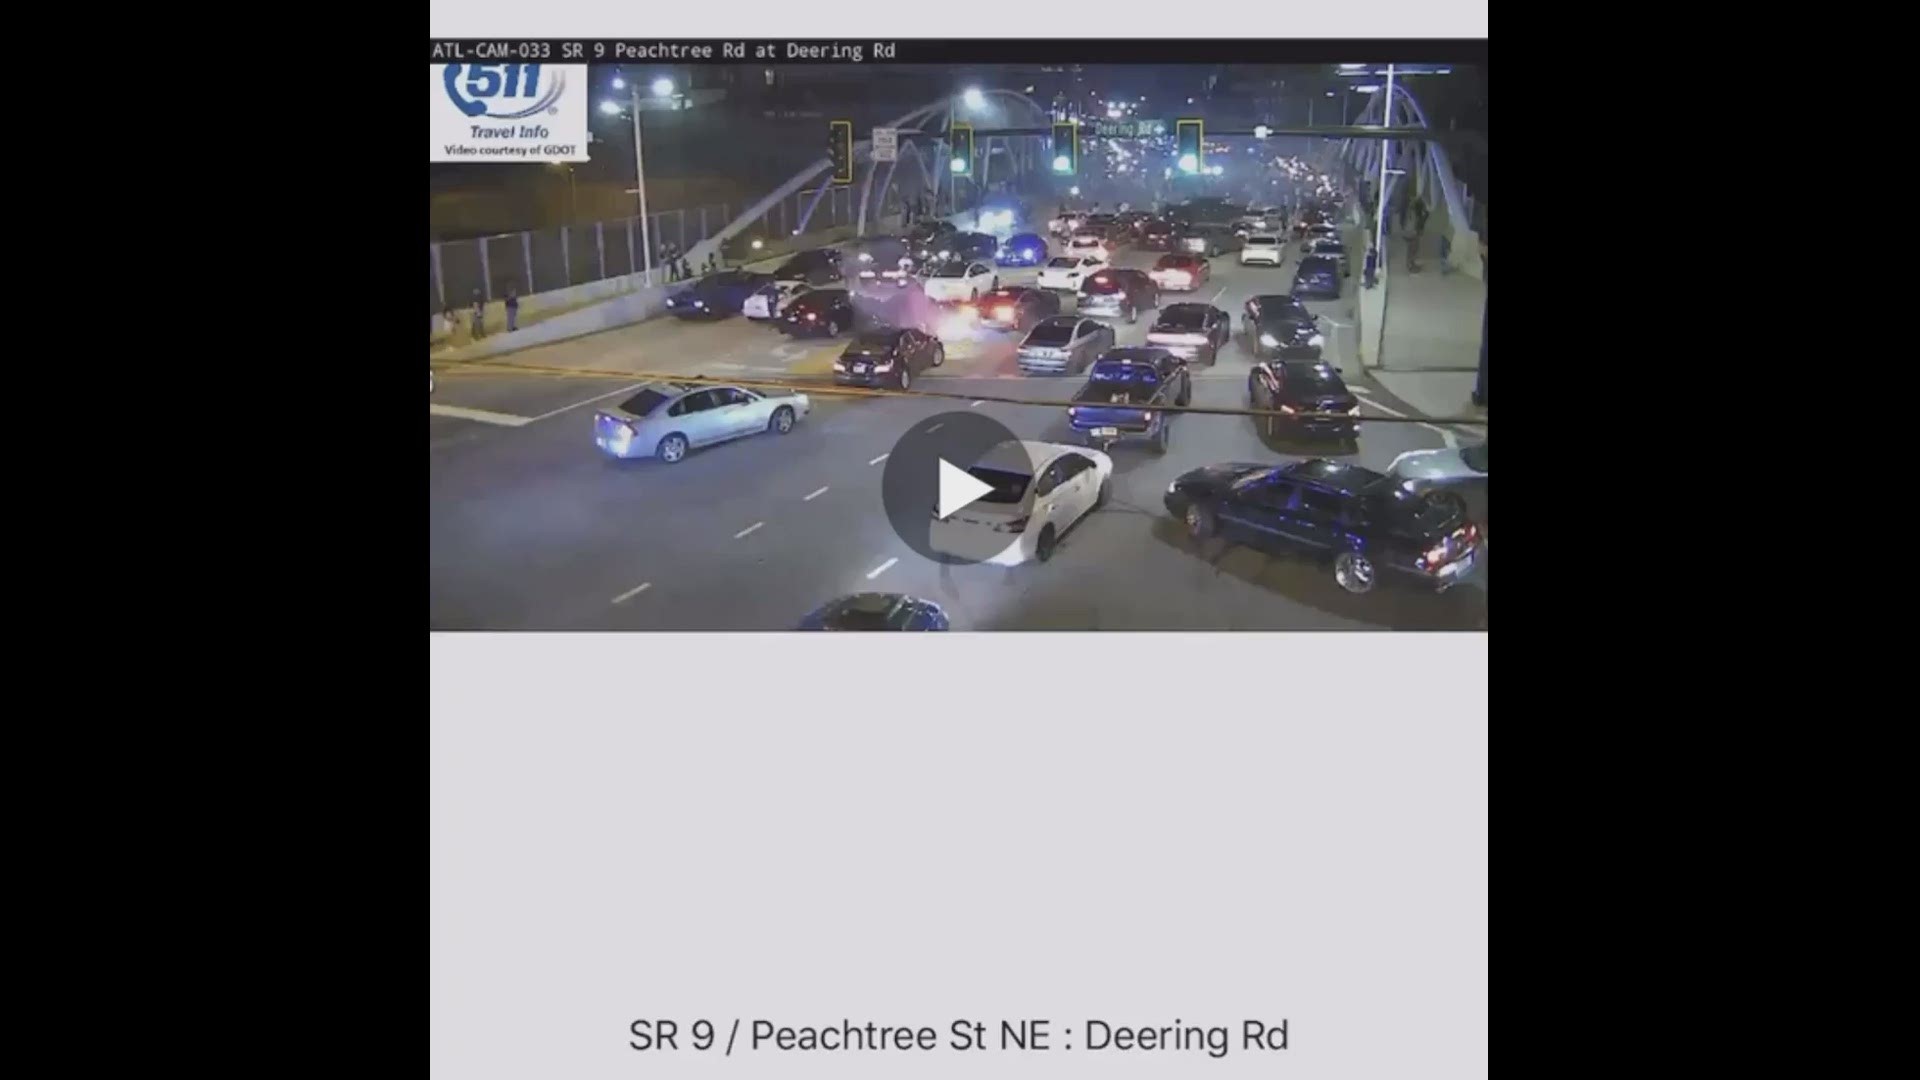 Atlanta Police officers said that they found about 100 cars blocking Peachtree Street when they responded to reports of street racing early Sunday morning.